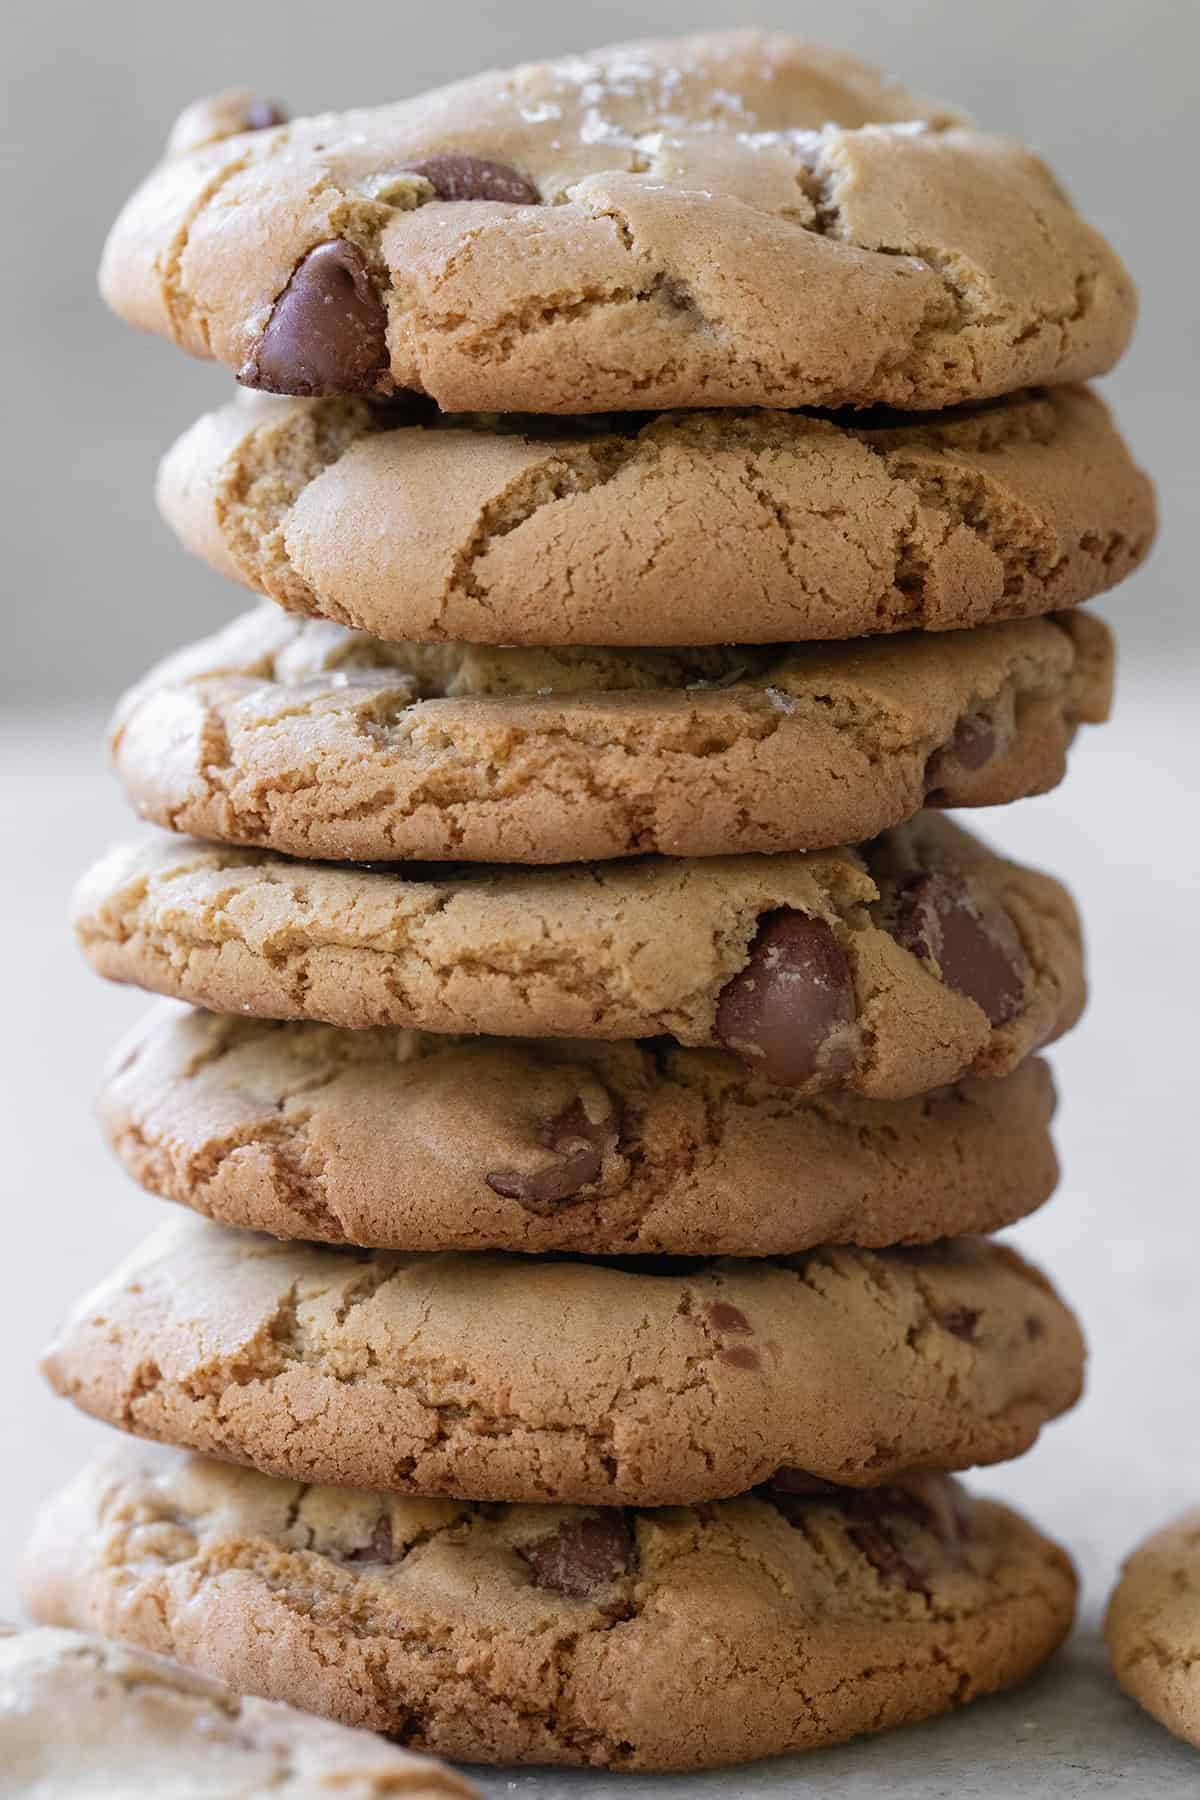 A stack of butterless chocolate chip cookies made with oil.